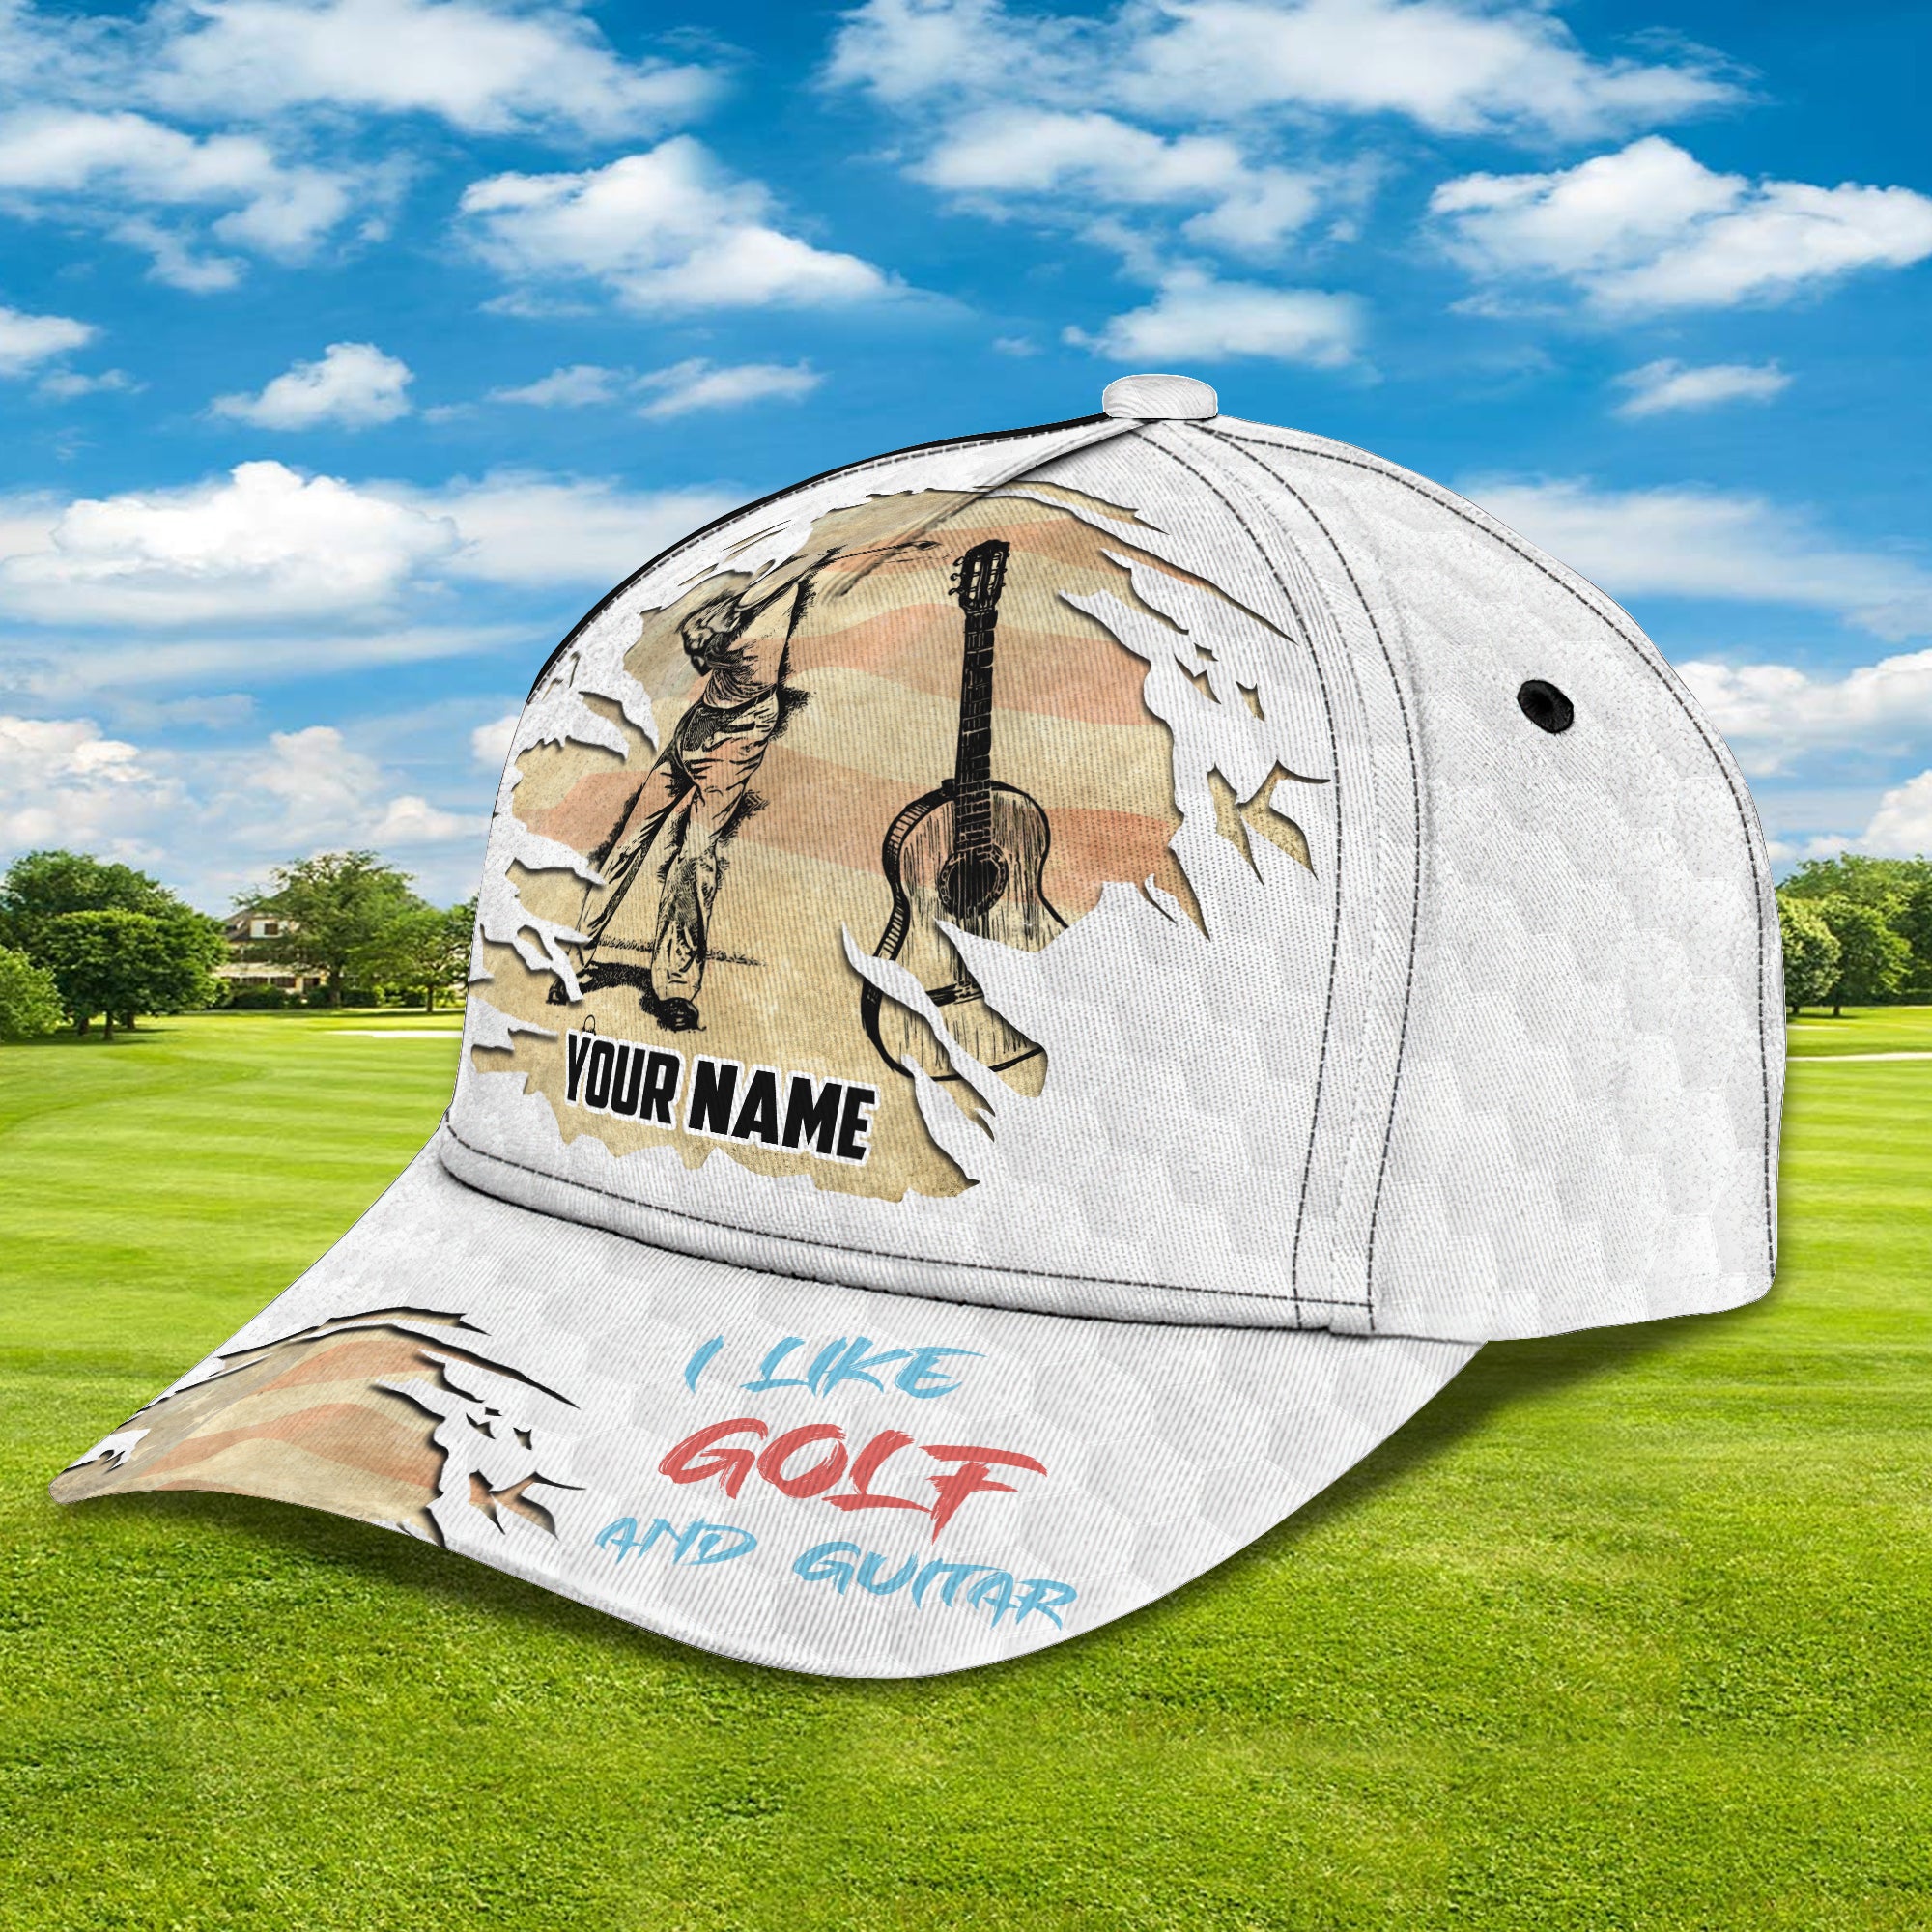 7749 Golf - Personalized Name Cap - ATM2K